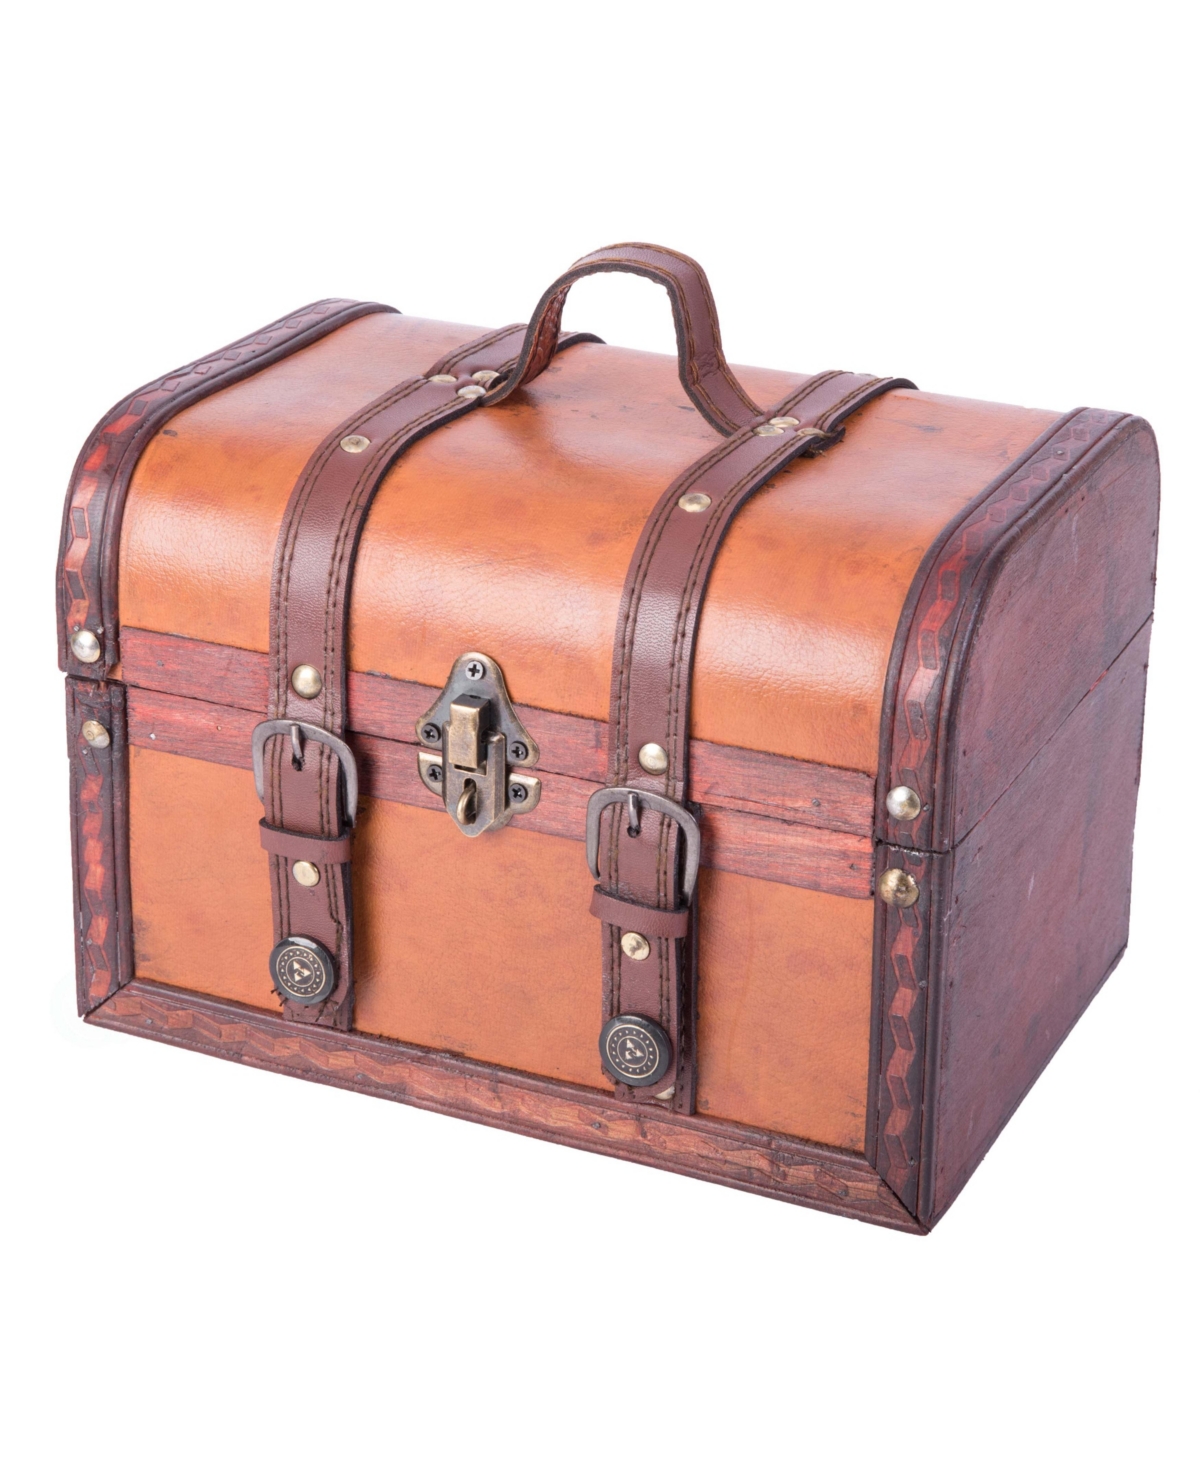 Vintiquewise Decorative Wood Leather Treasure Box - Large Trunk In Brown